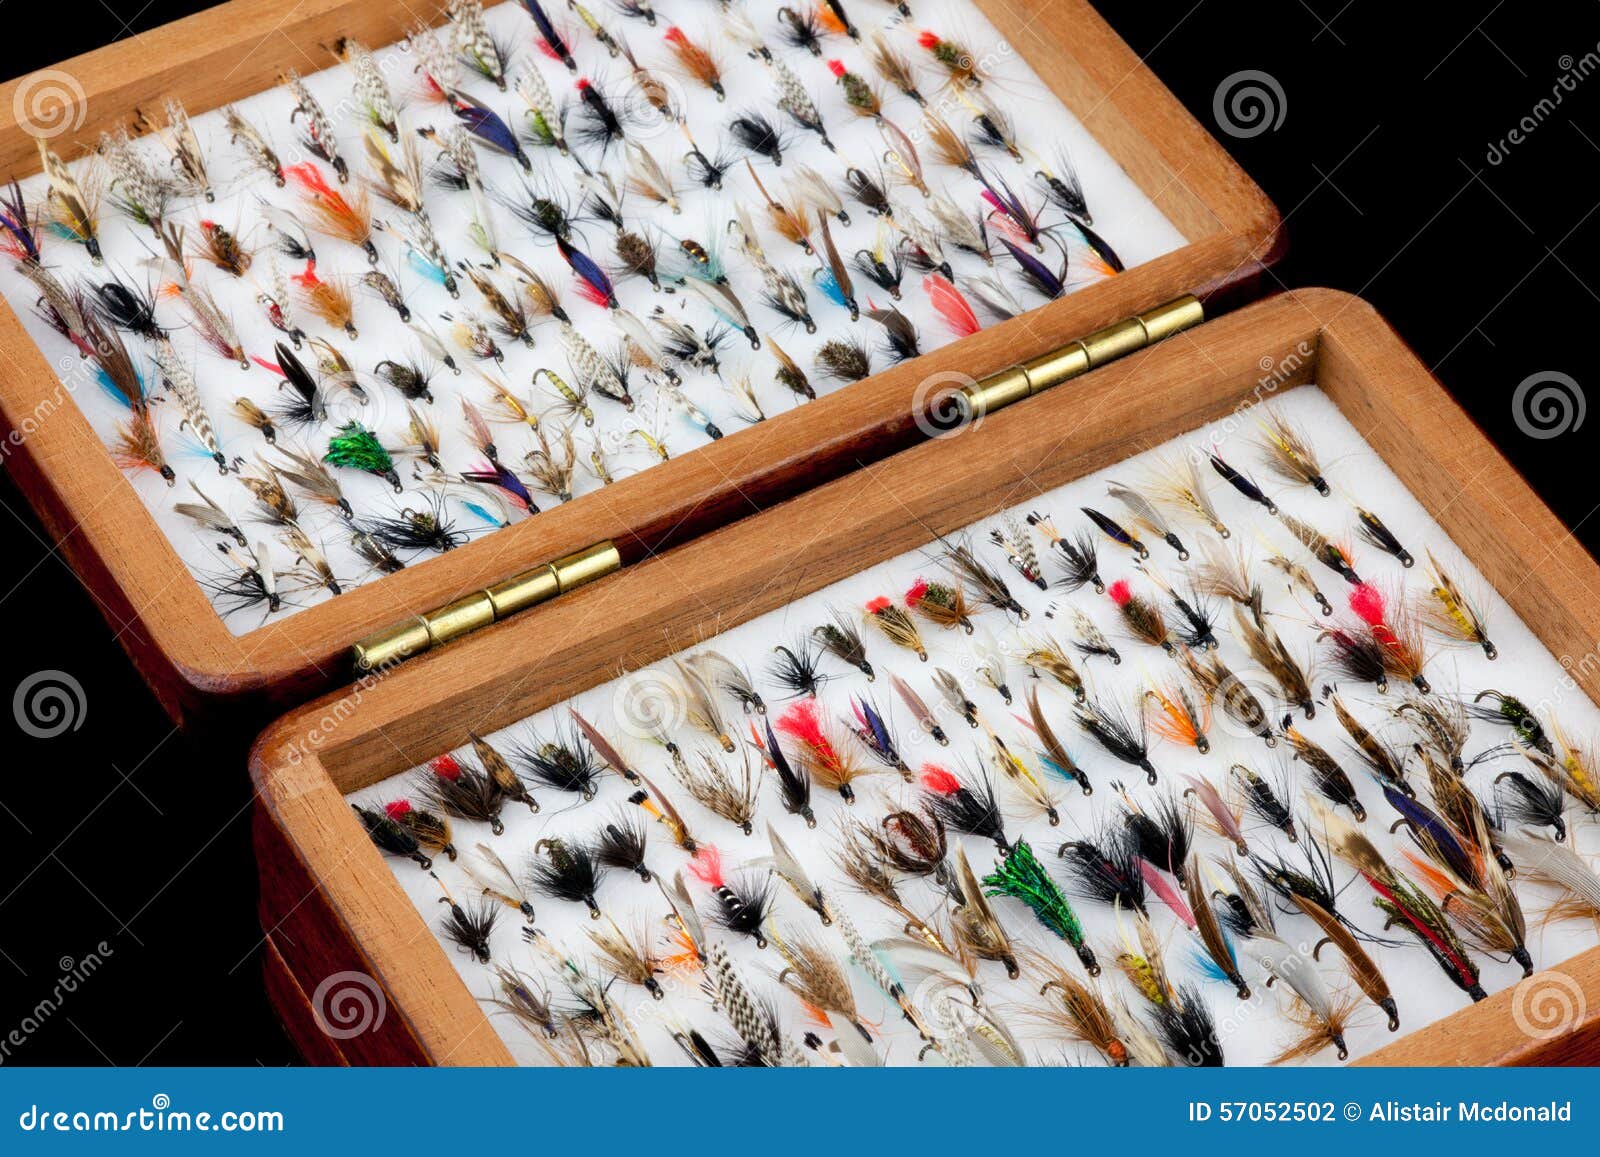 https://thumbs.dreamstime.com/z/trout-fishing-flies-old-wooden-fly-box-collection-classic-traditional-57052502.jpg